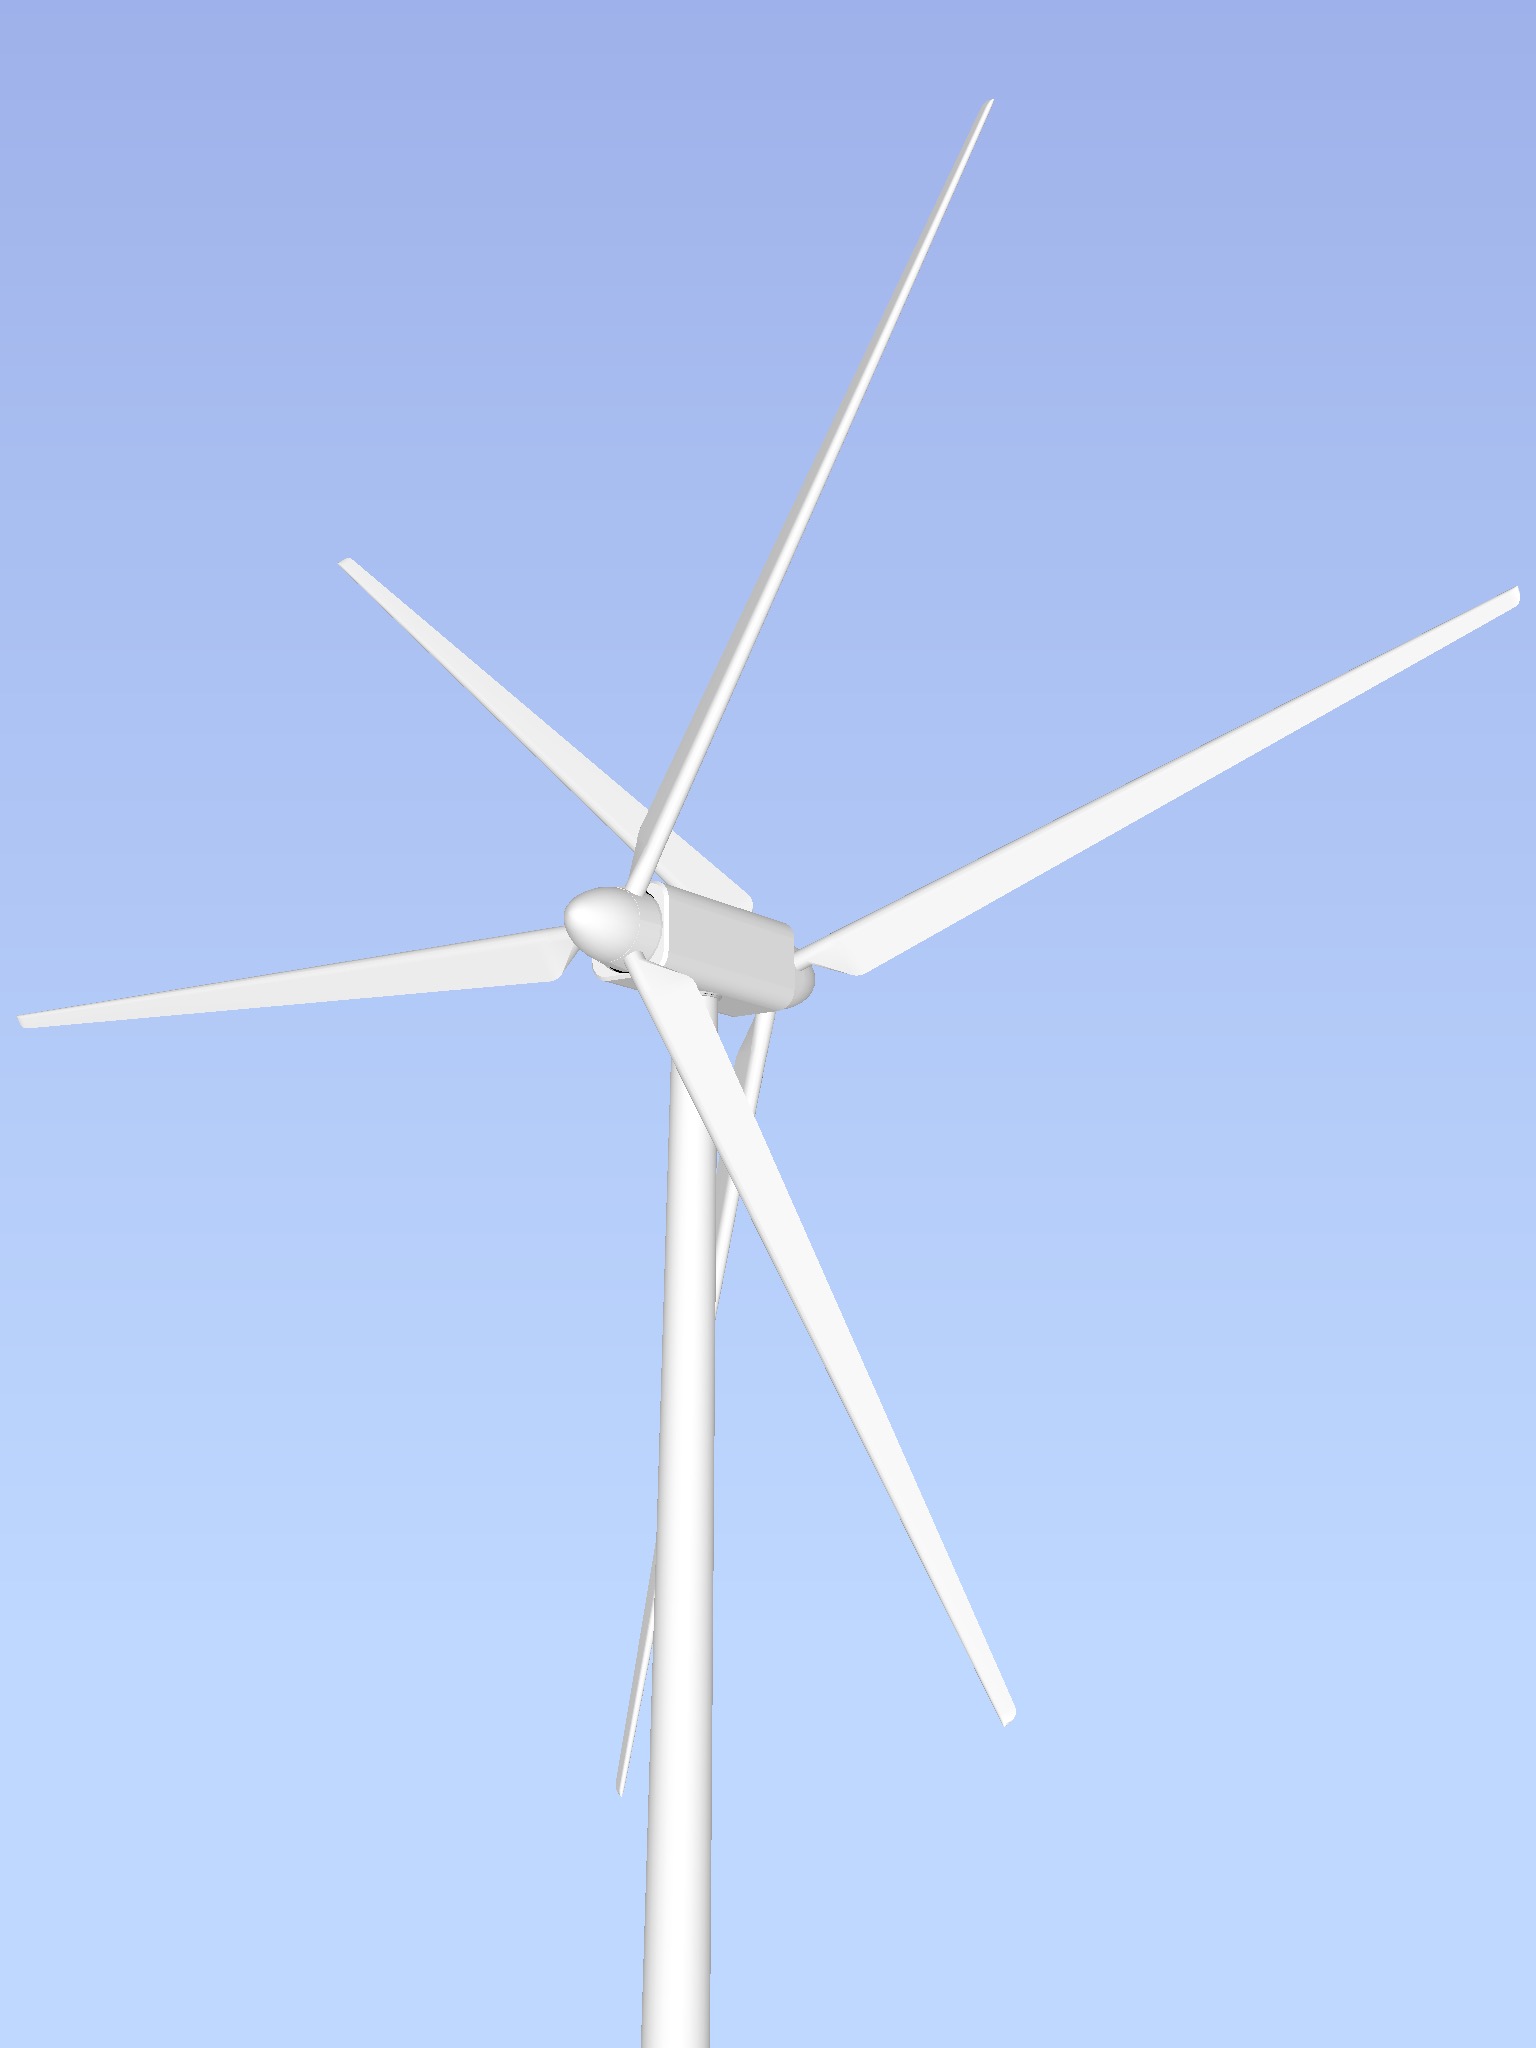 Amazing Wind Turbine Pictures & Backgrounds